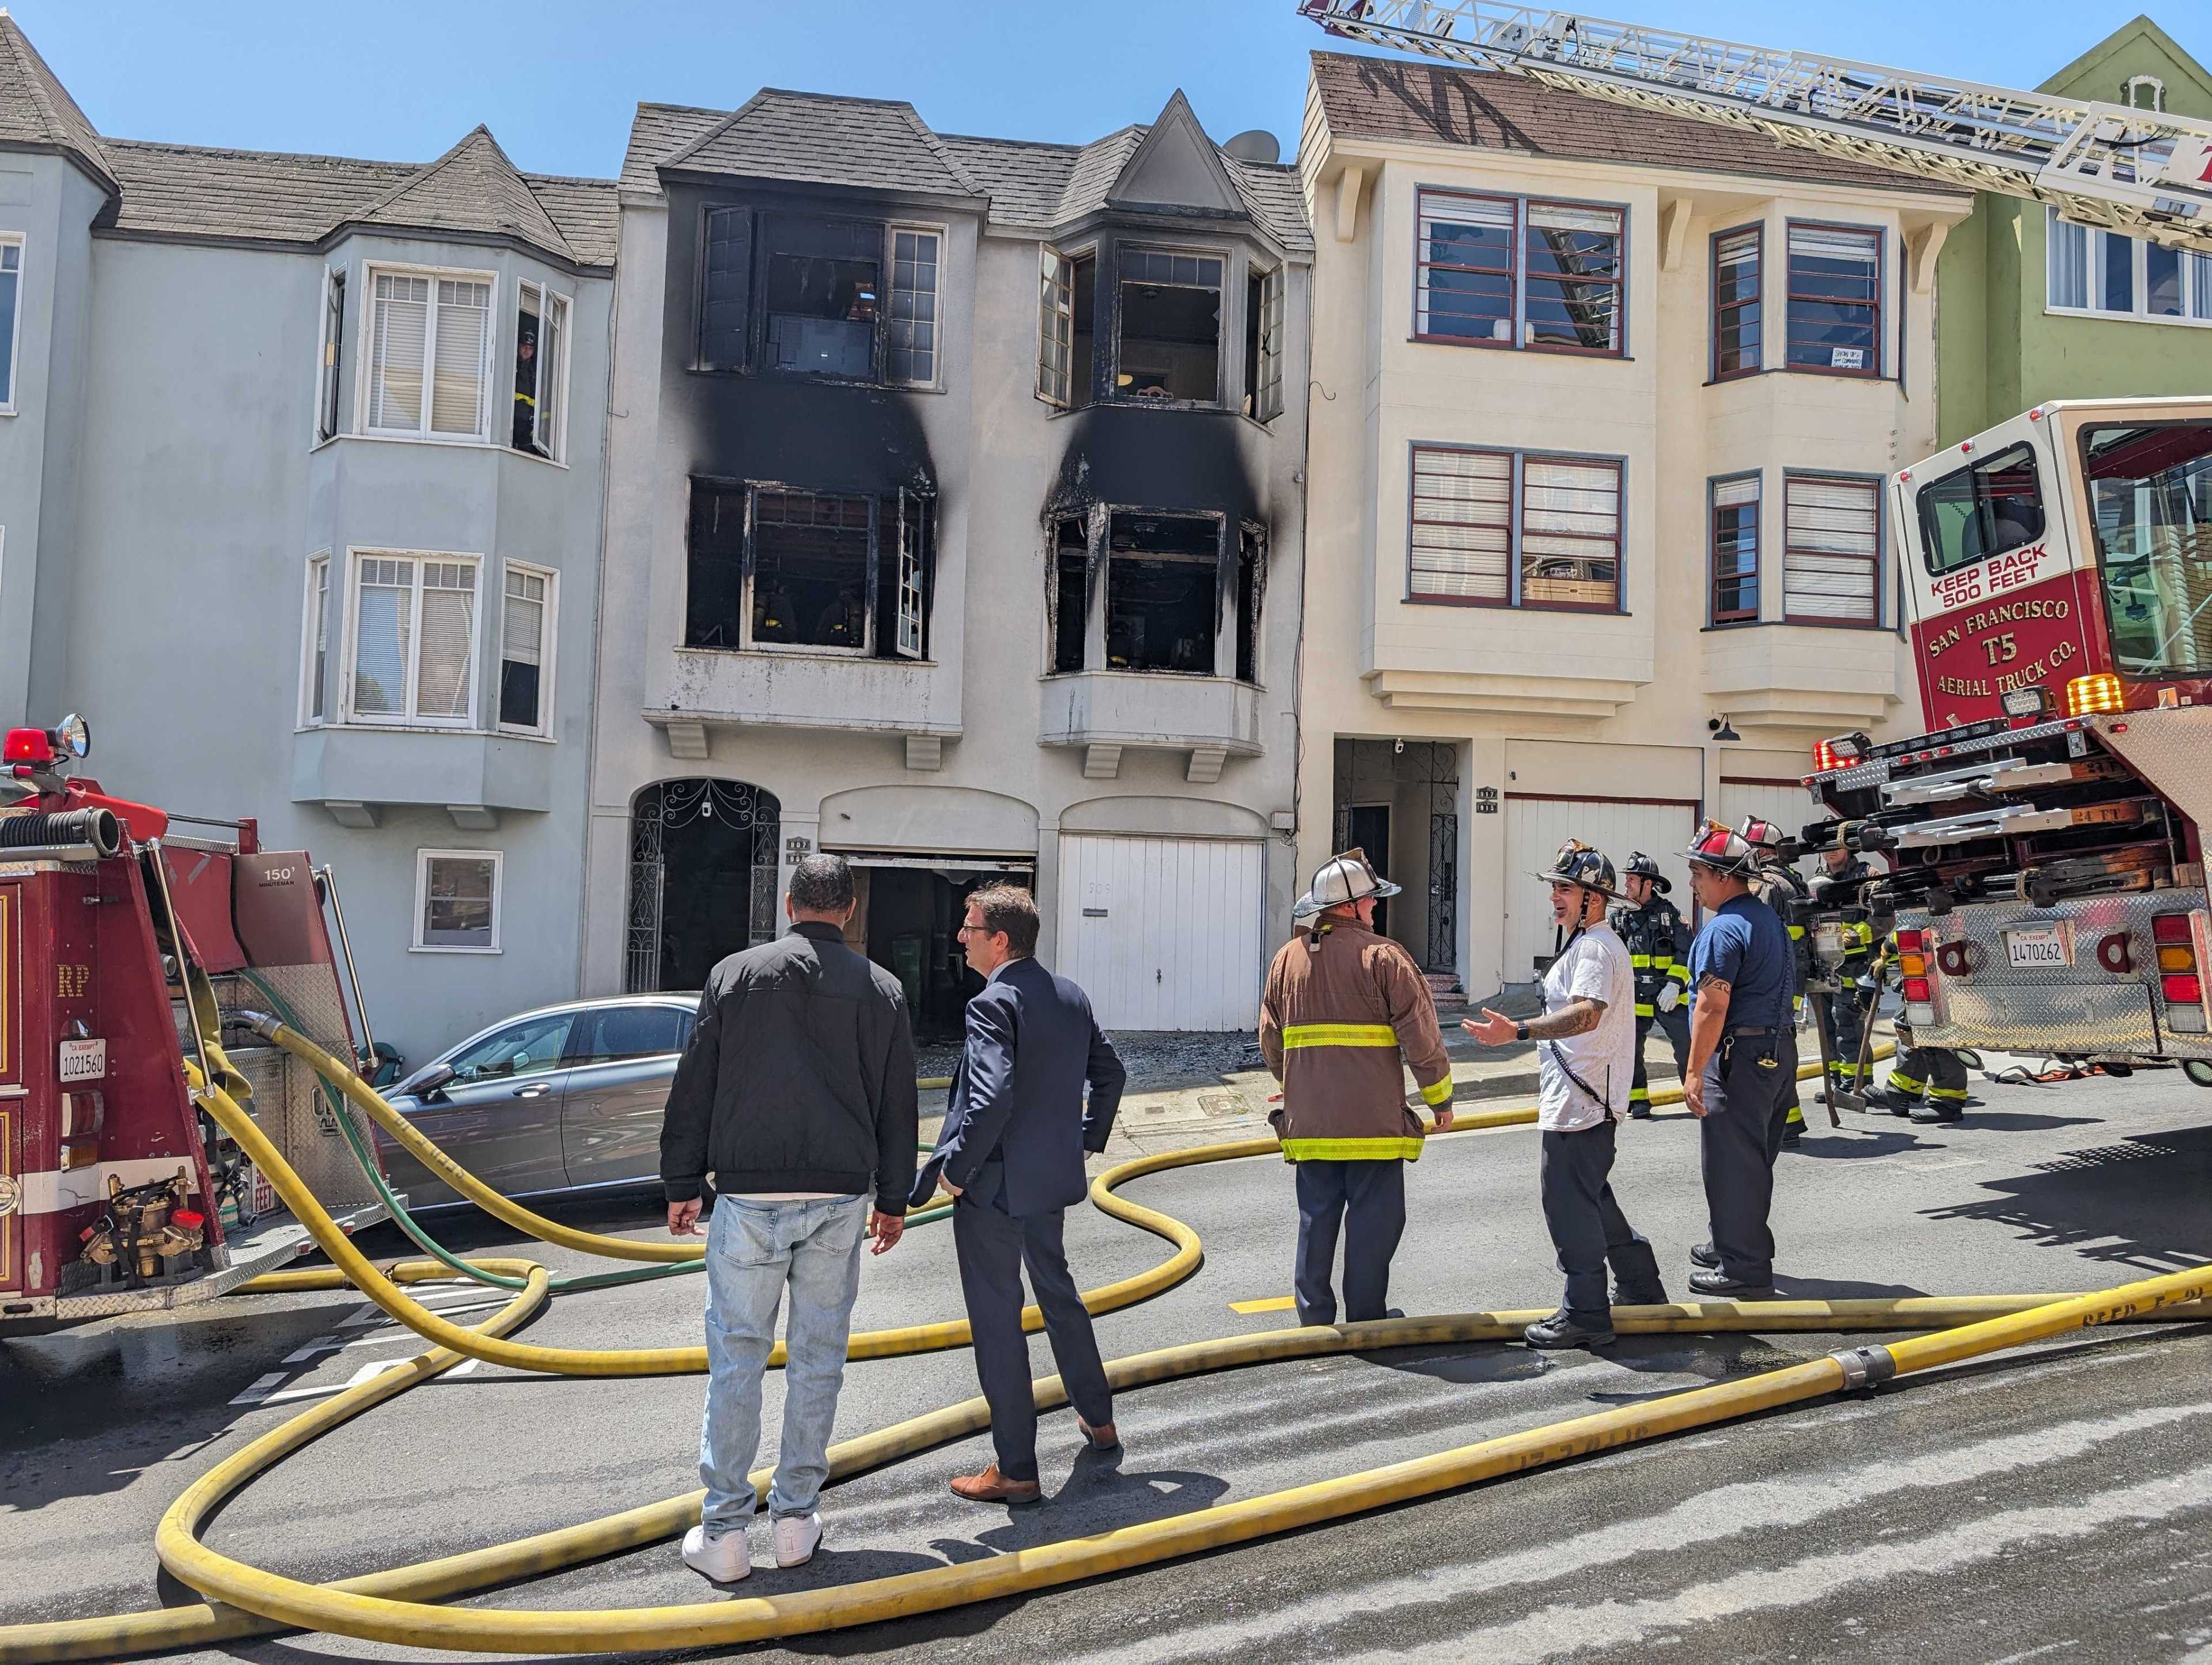 Firefighters work at a fire-damaged building with charred windows, as men overlook the scene, and fire trucks line the street.